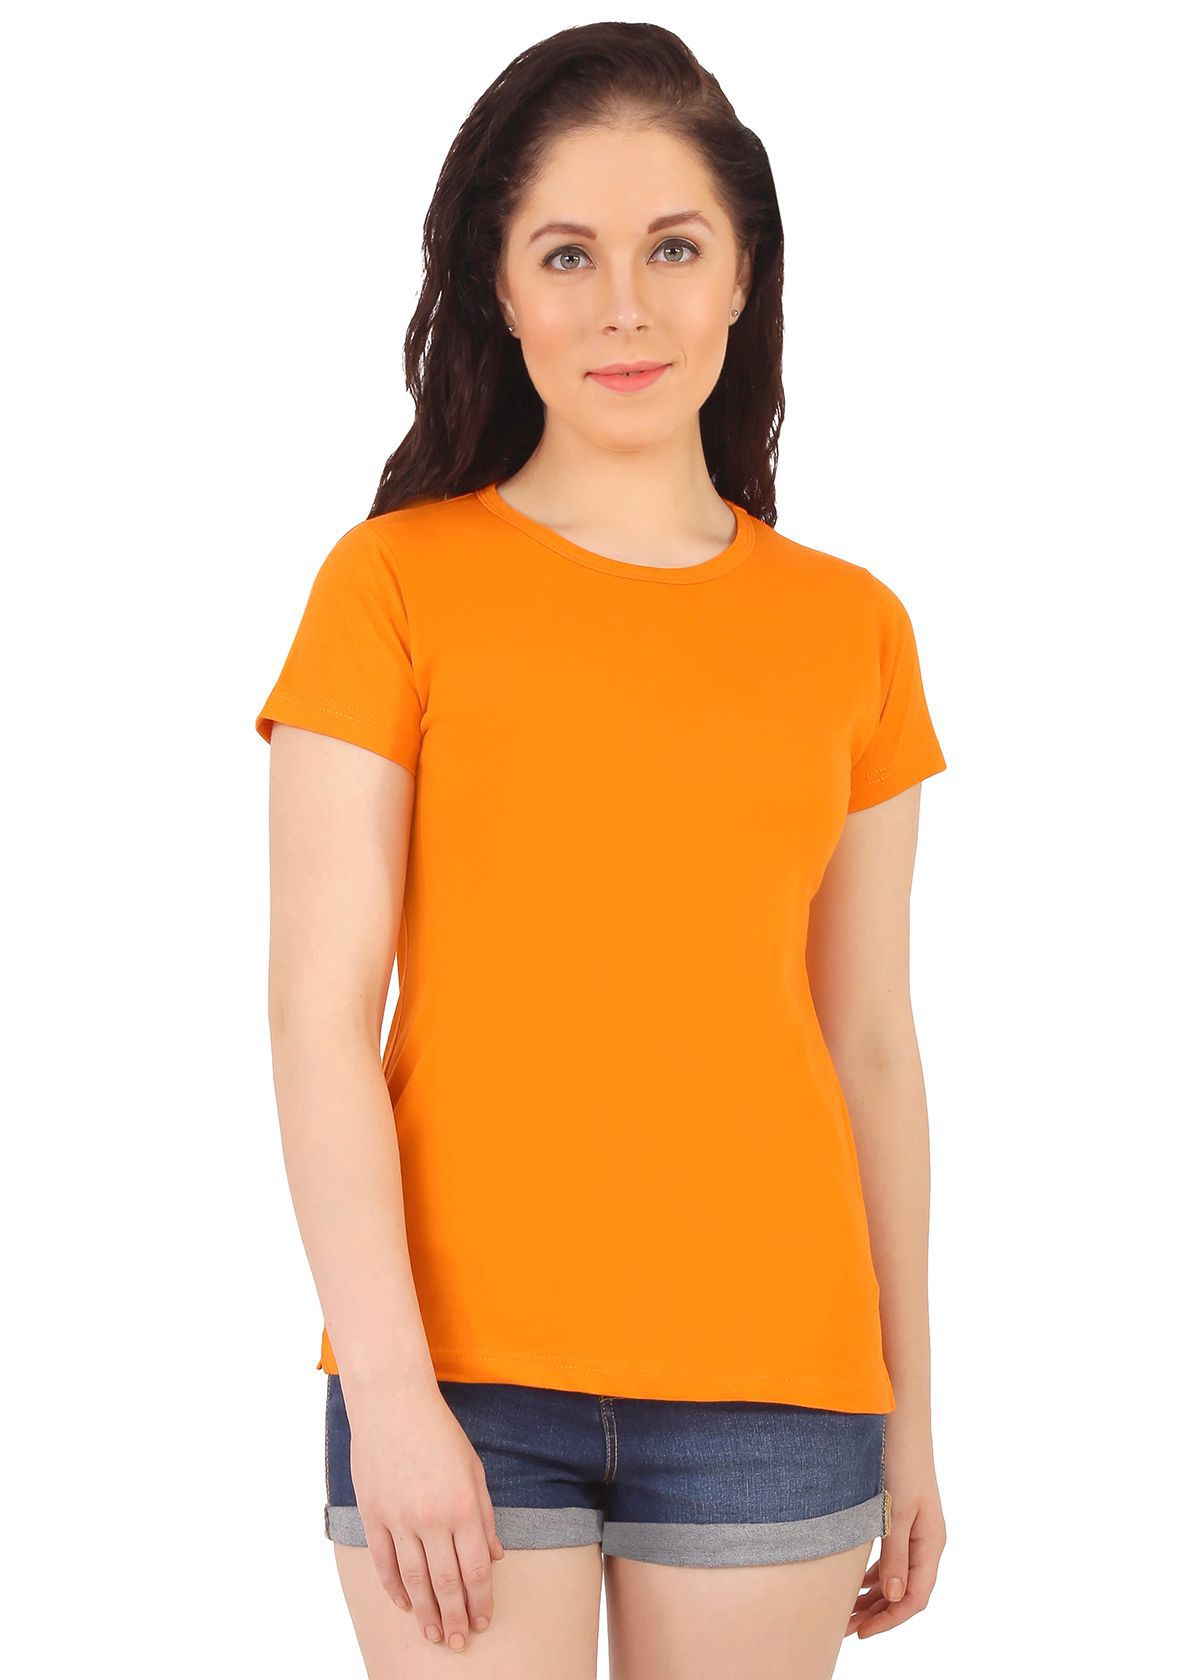 Buy Covet Cotton Orange T-Shirts Online at Best Prices in India - Snapdeal